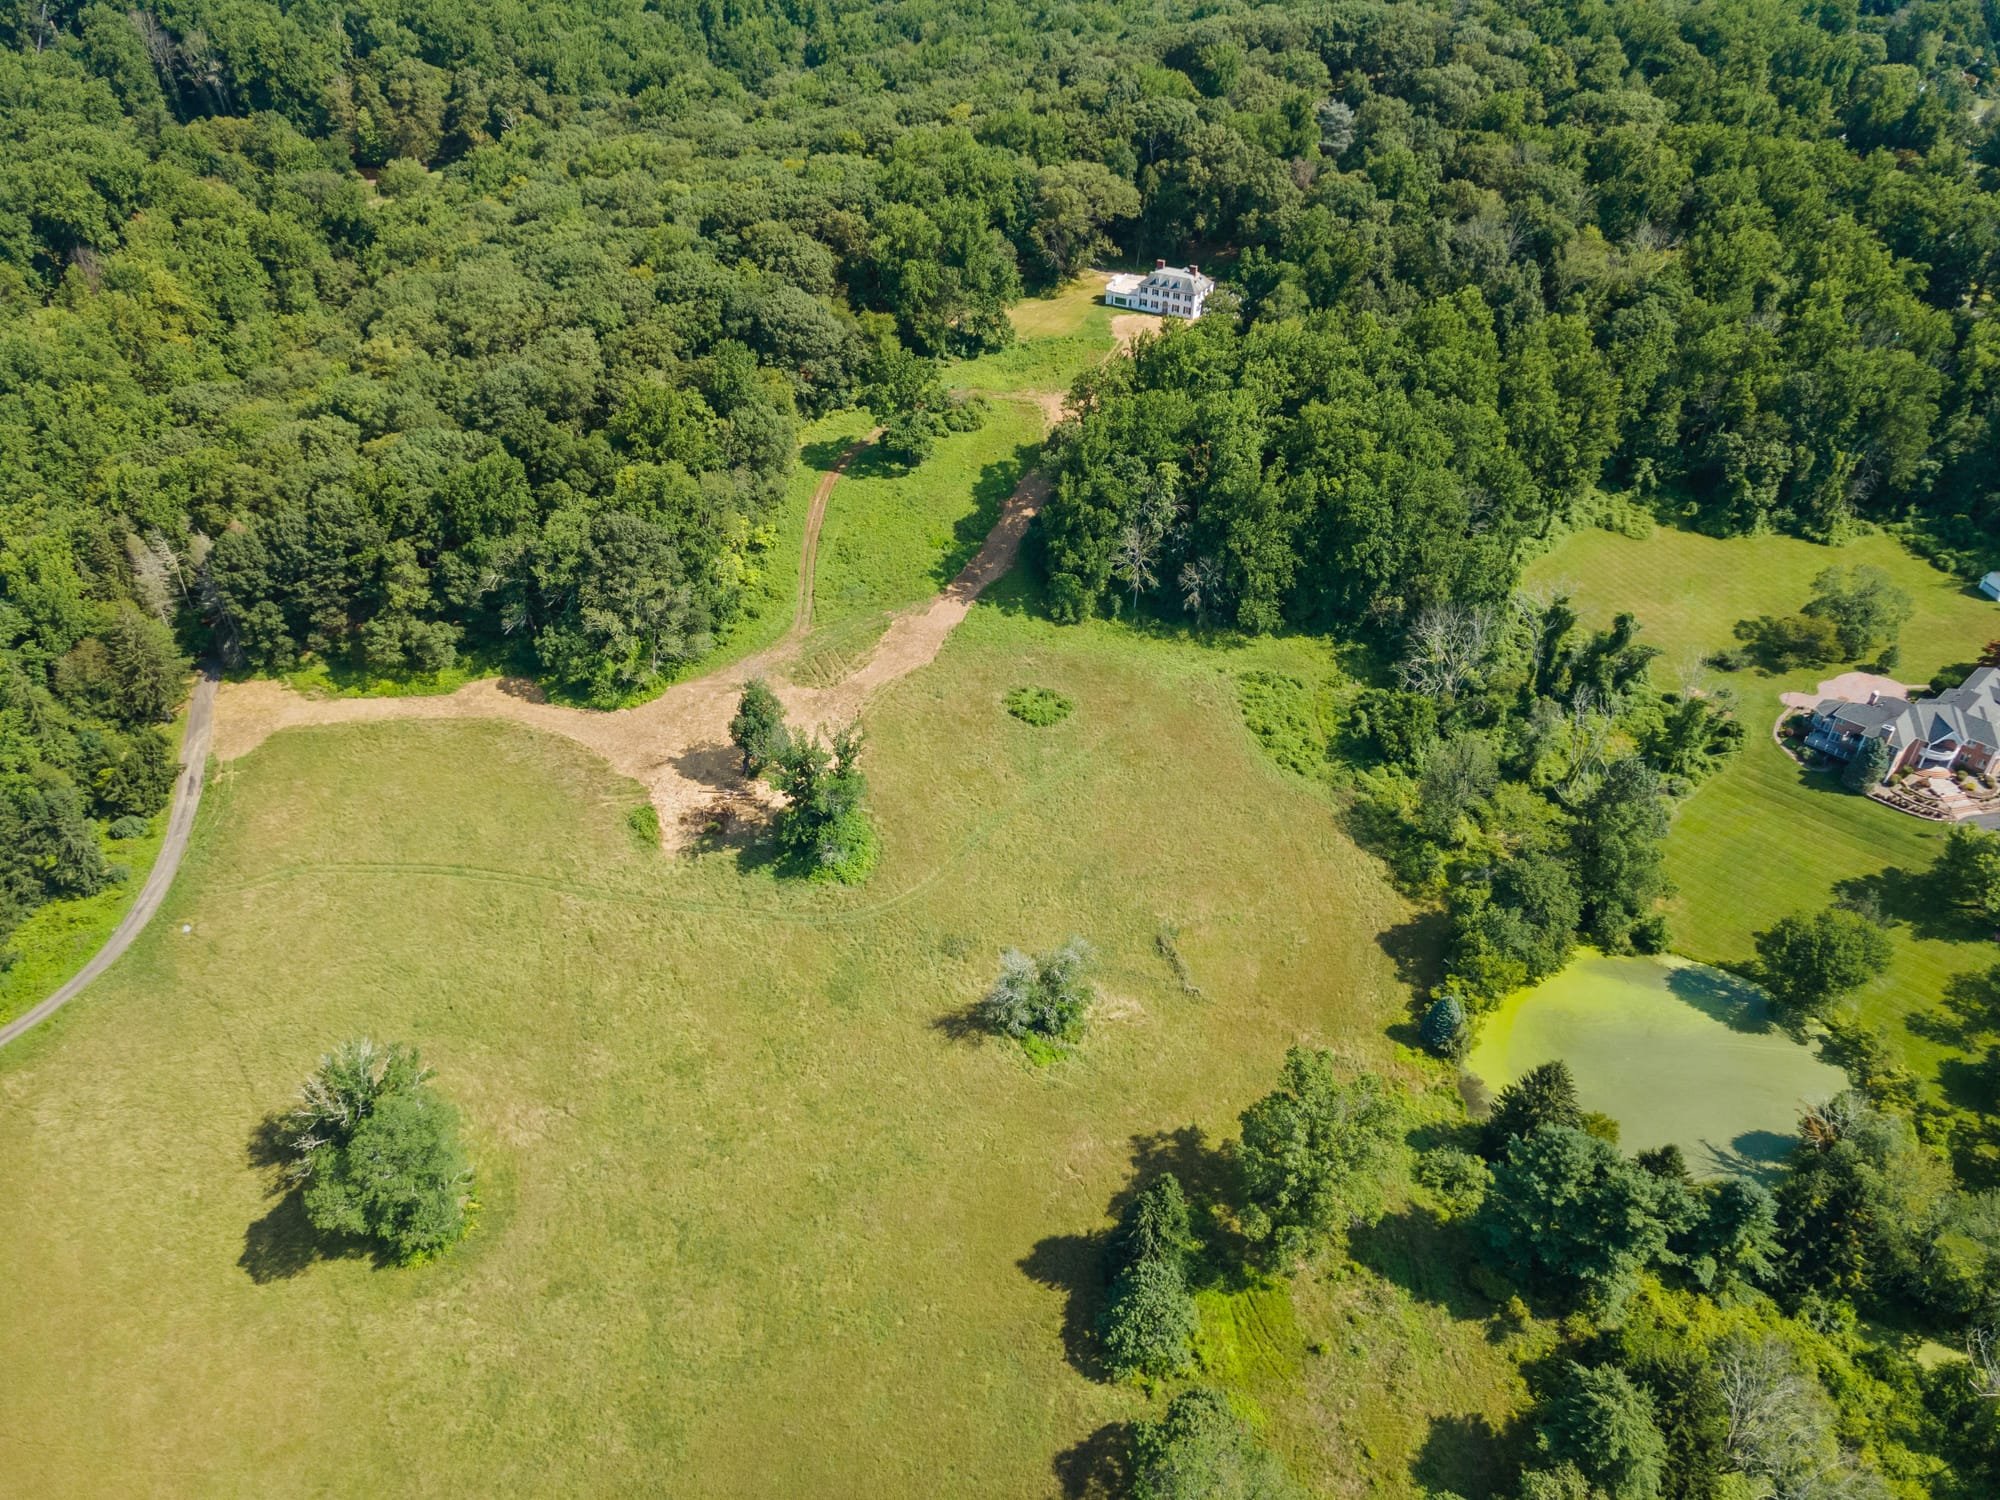 SOLD! 100 YEAR OLD HOME WITH 46 ACRES! $3,635,000 BERNARDSVILLE